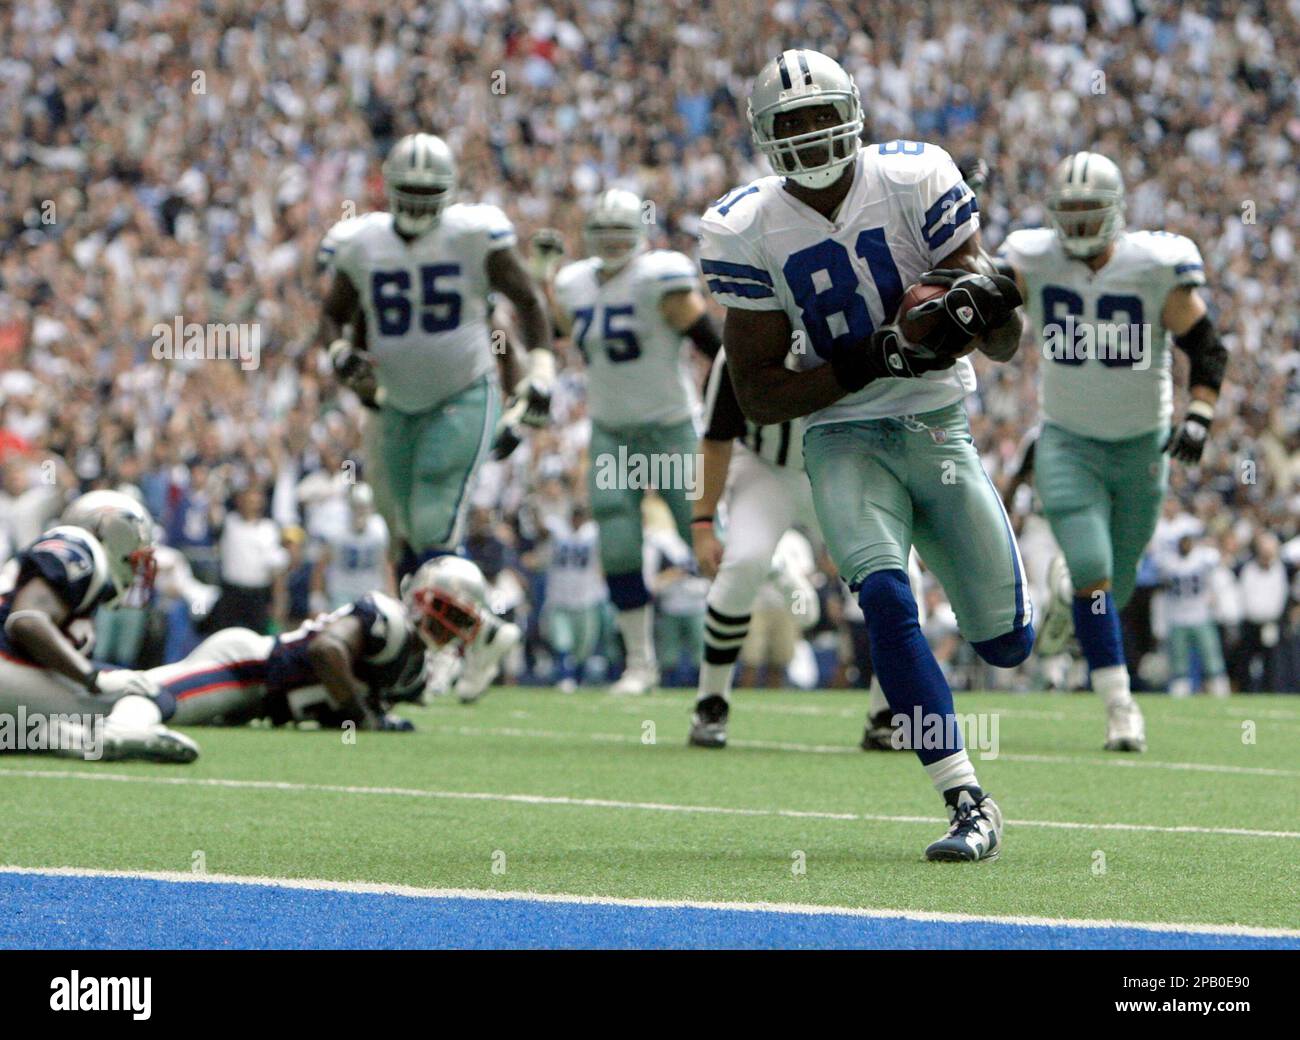 Dallas Cowboys wide receiver Terrell Owens (81) steps into the end zone for  a touchdown against the San Francisco 49ers during second quarter action.  The Cowboys defeated the 49ers 35-22, at Texas